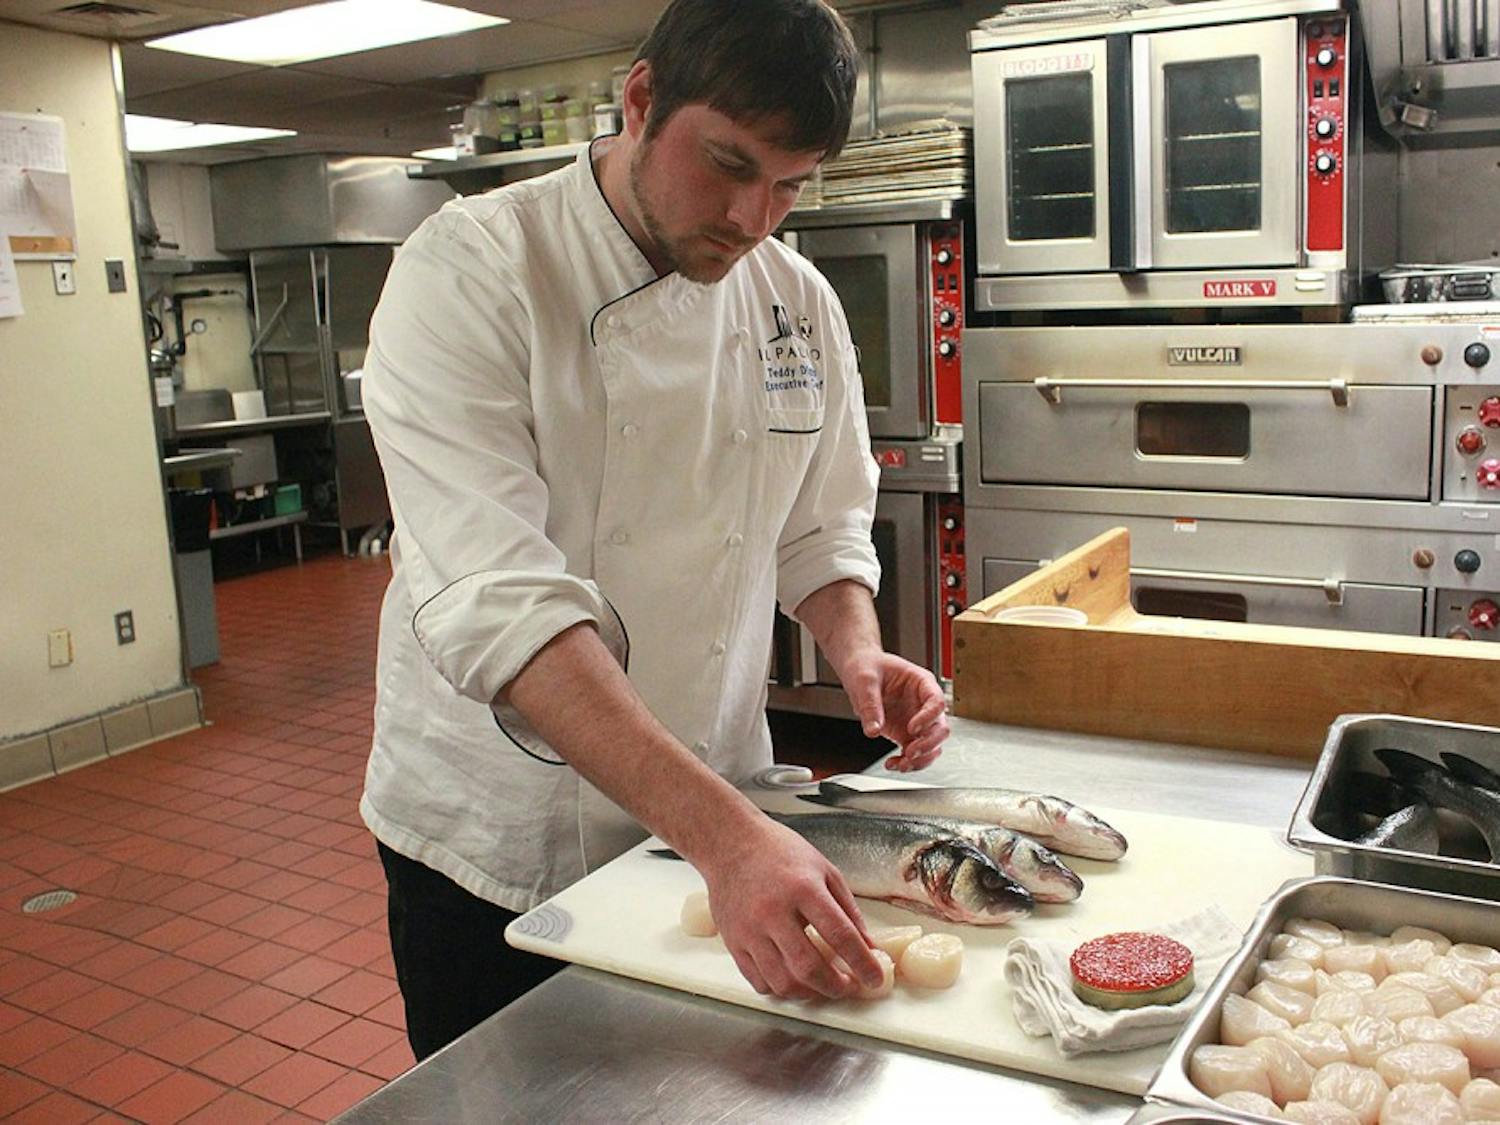 Teddy Diggs, head chef at Il Palio, is pictured on Tuesday afternoon in the restaurant's kitchen. On the relationship between fish suppliers and chefs, Diggs commented "You really have to trust the person you're buying from."